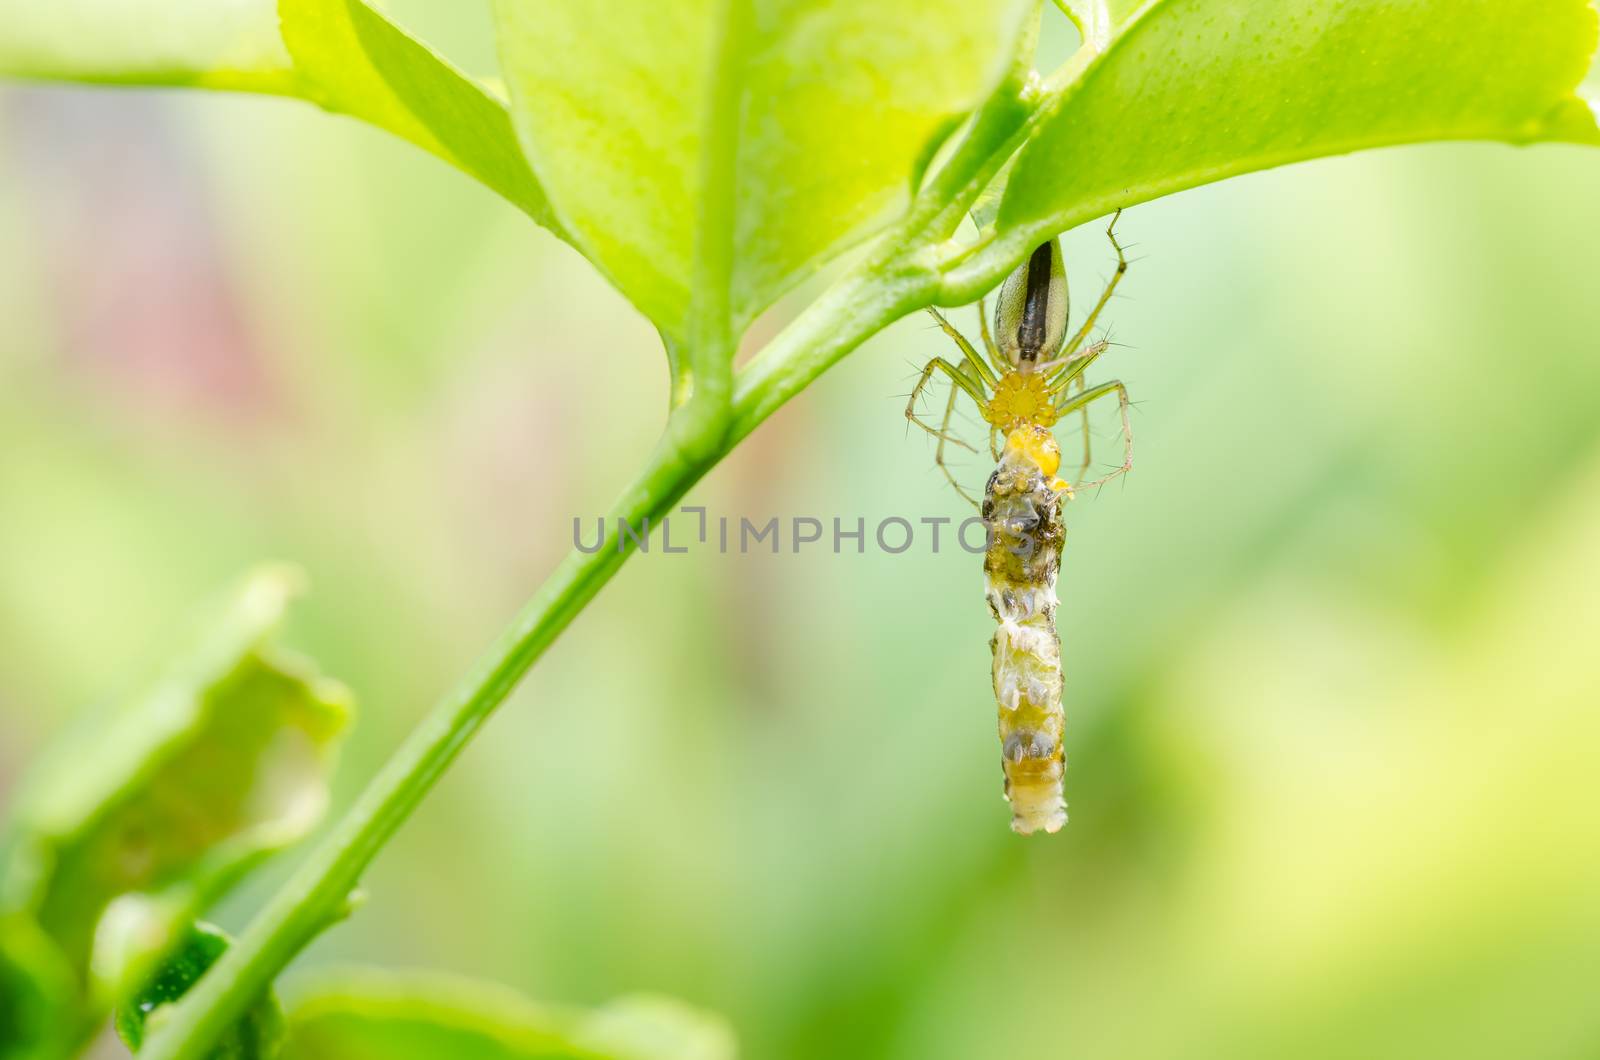 Spider eat worm in green nature background by sweetcrisis